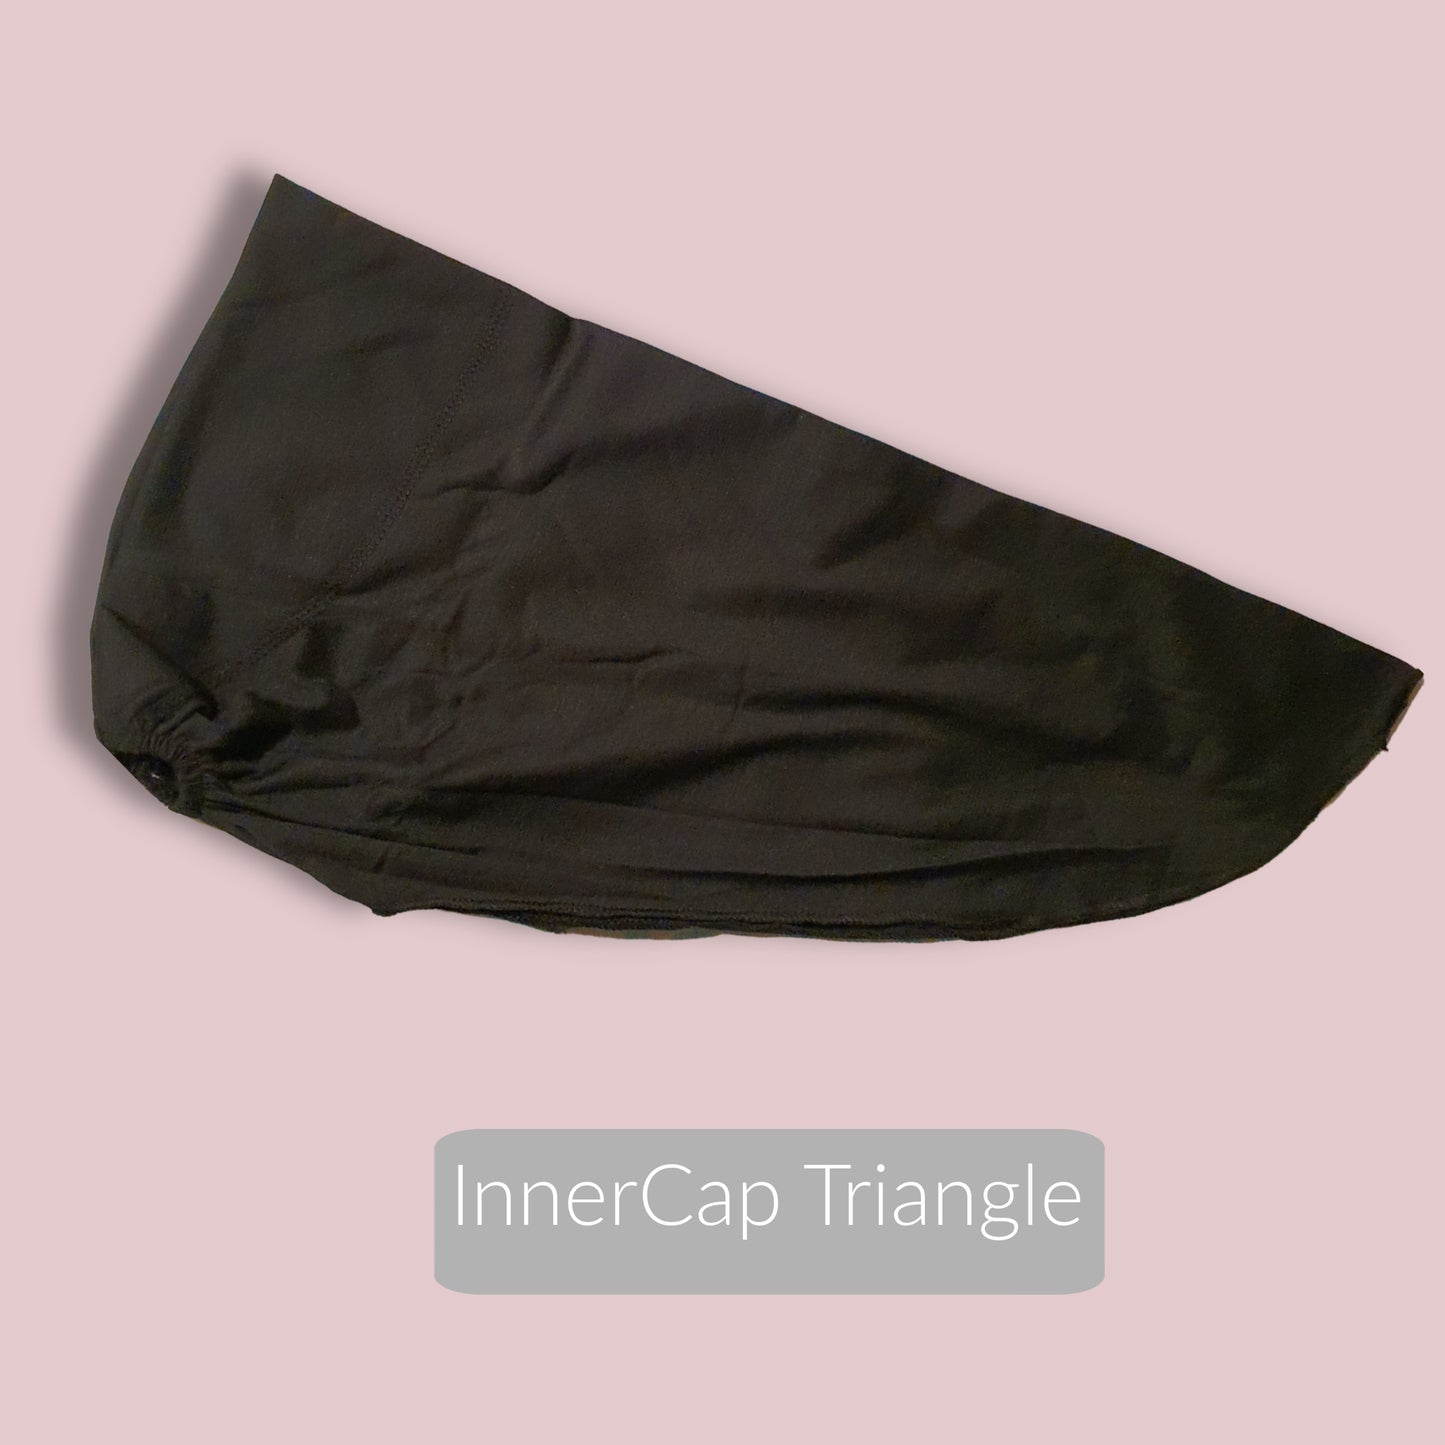 InnerCap (Triangle) - set of 3 or 4